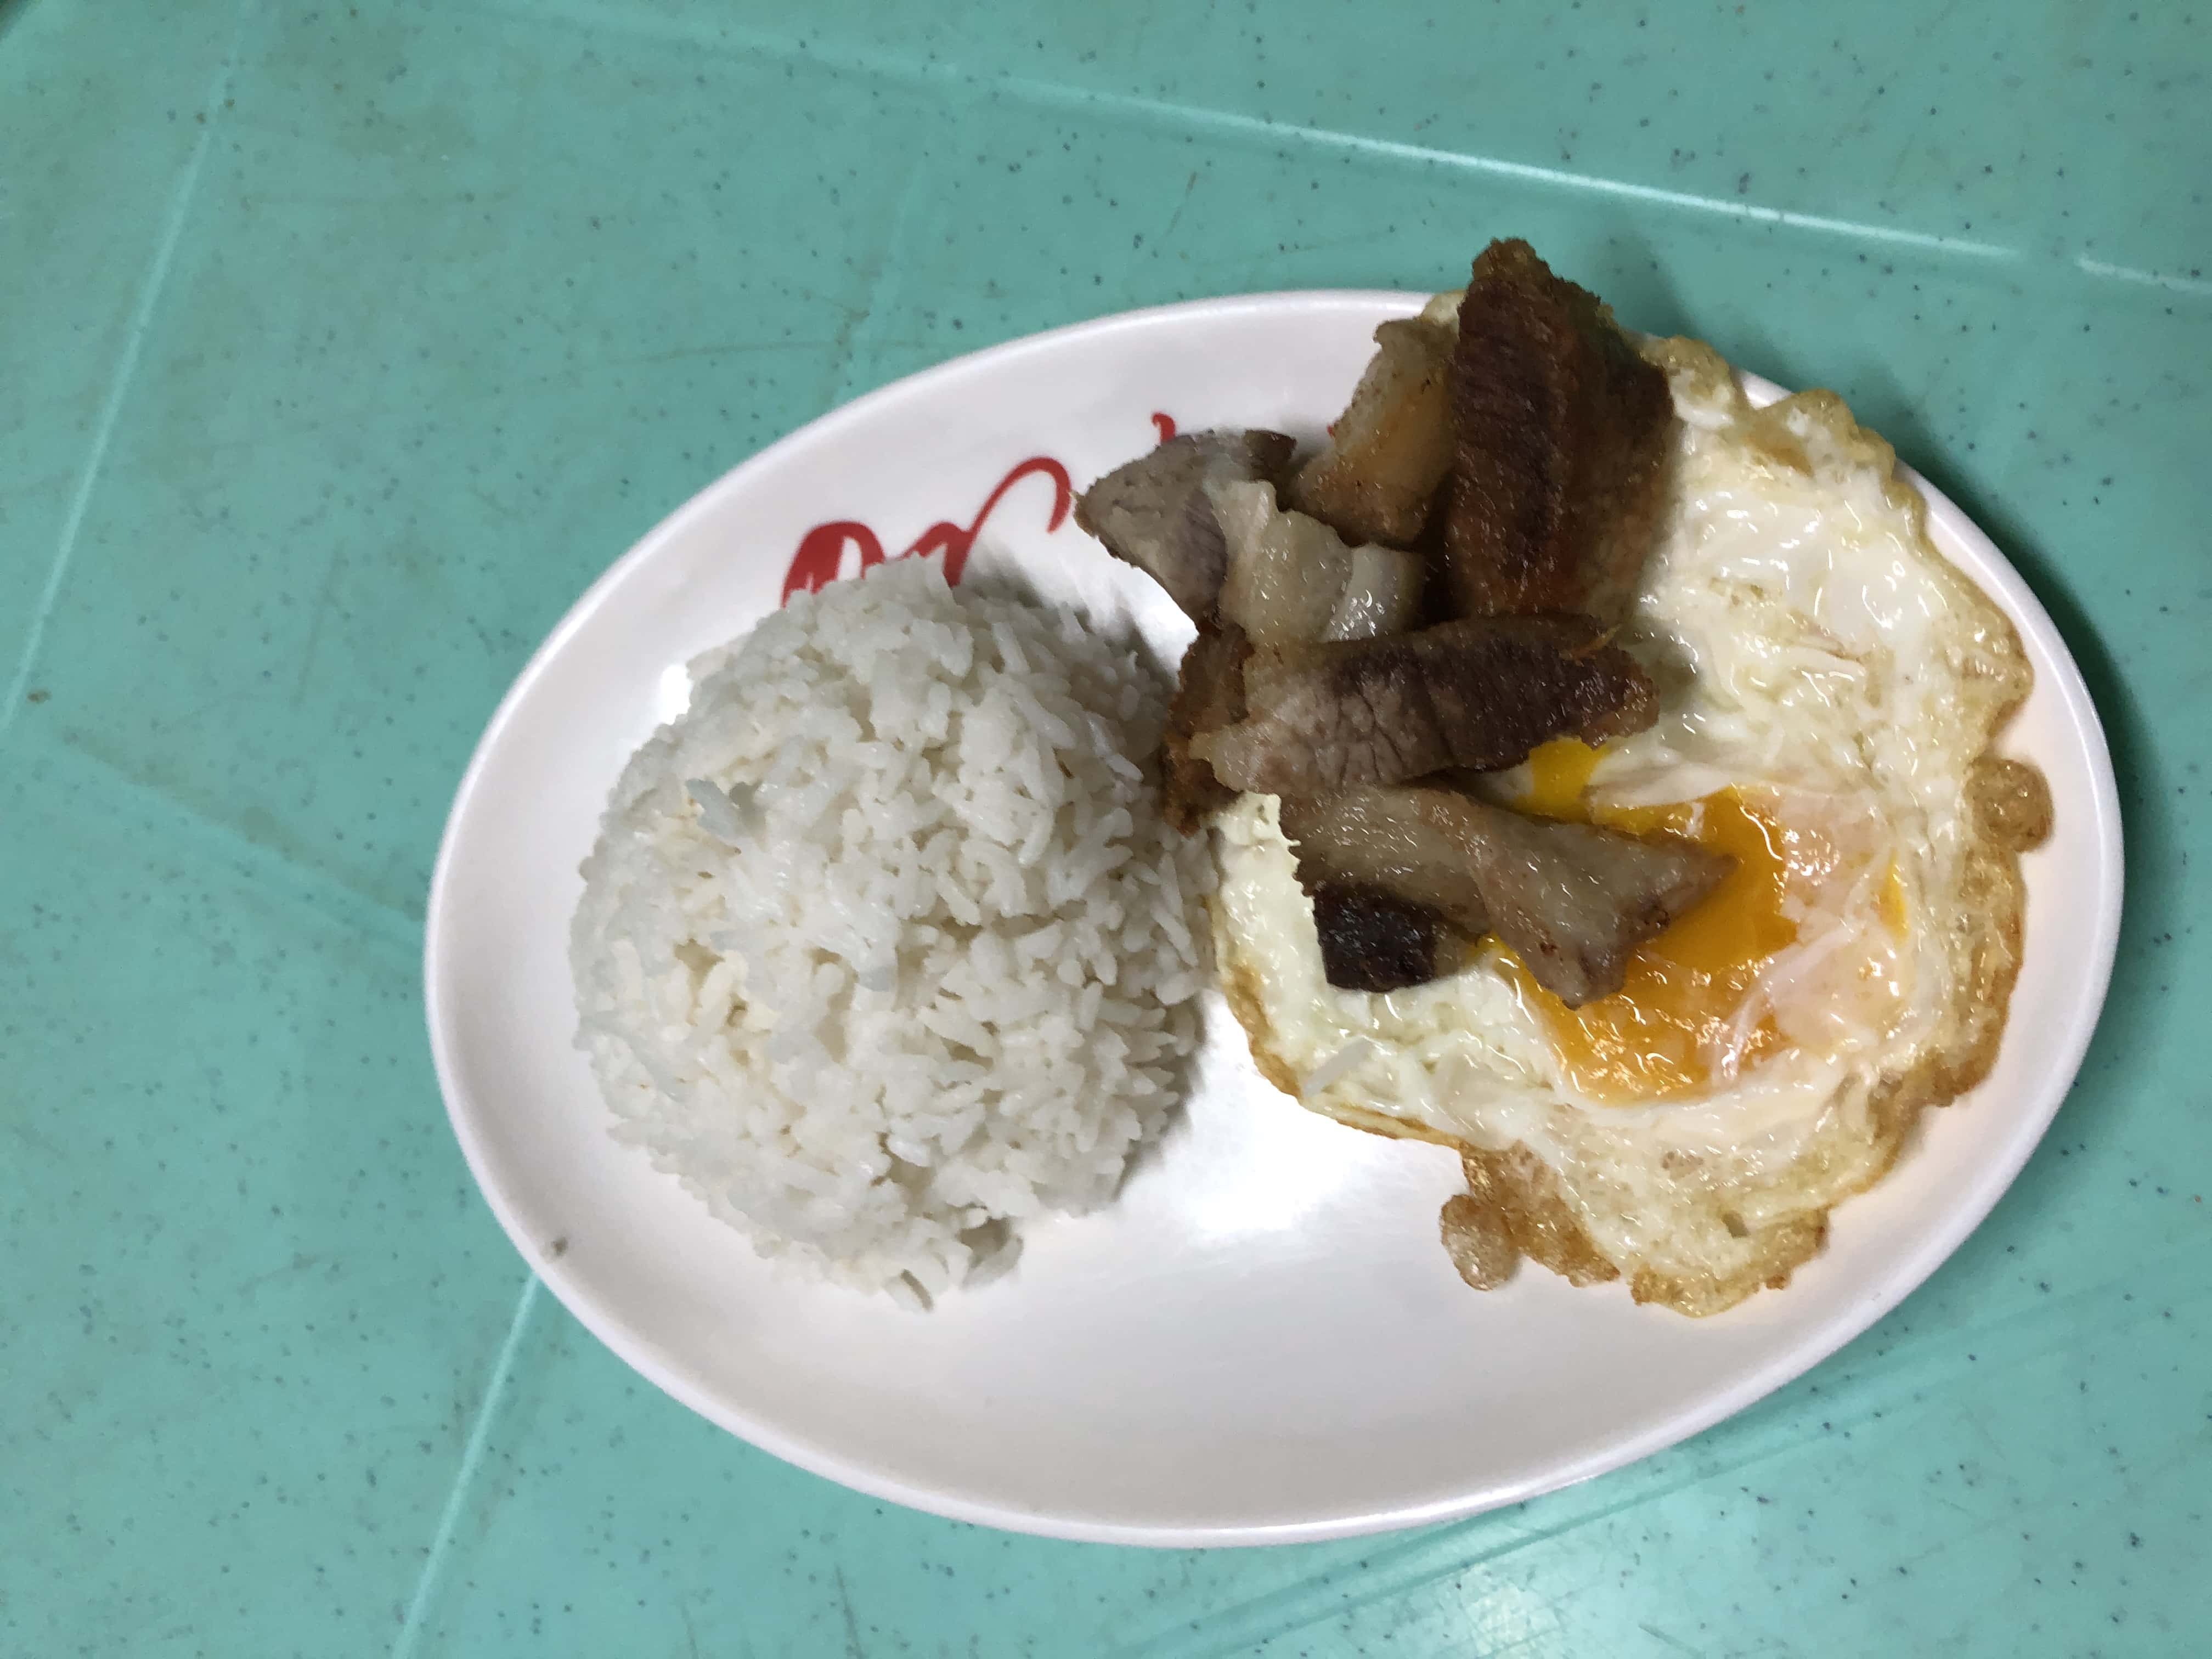 what to eat in ilocos norte, things to do in Laoag, Bagnet, things to do in Pagudpud, food to try in Pagudpud, where to eat in Pagudpud, local carinderia in Pagudpud